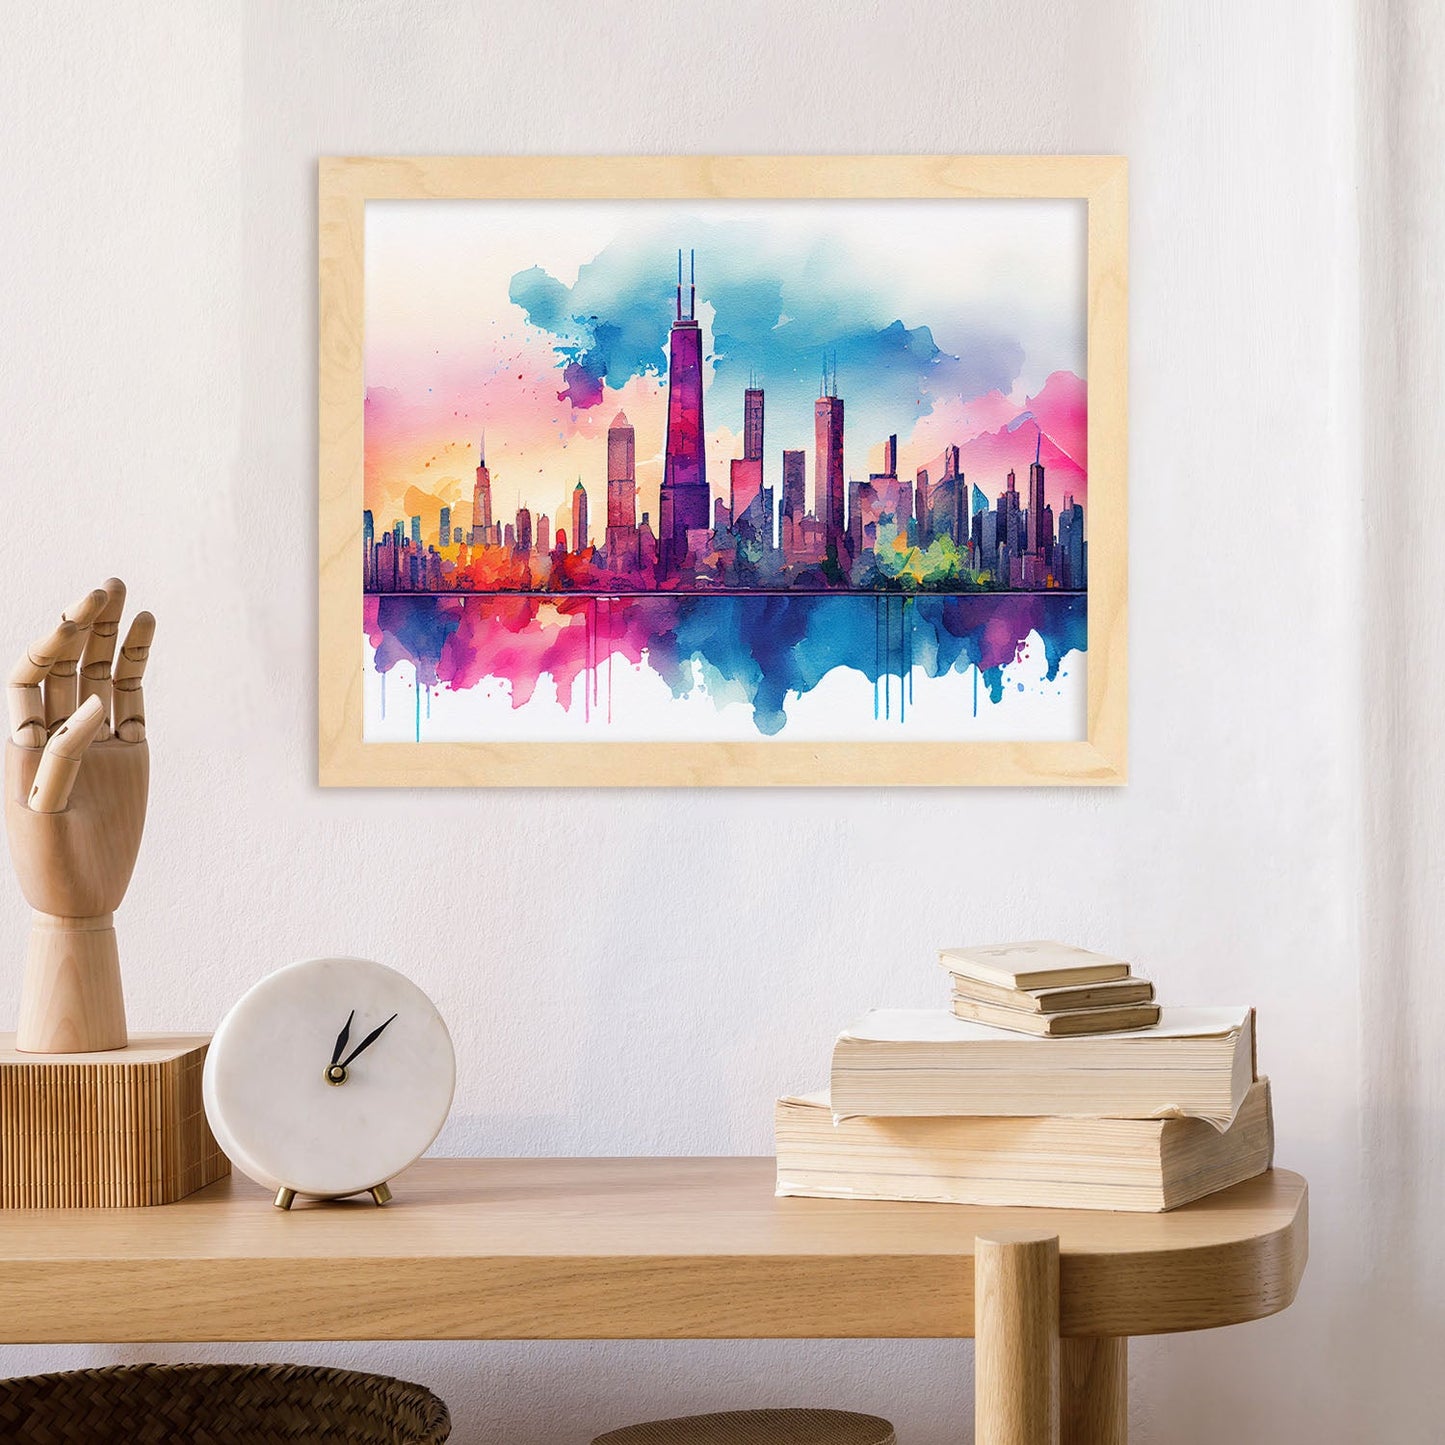 Nacnic watercolor of a skyline of the city of Chicago. Aesthetic Wall Art Prints for Bedroom or Living Room Design.